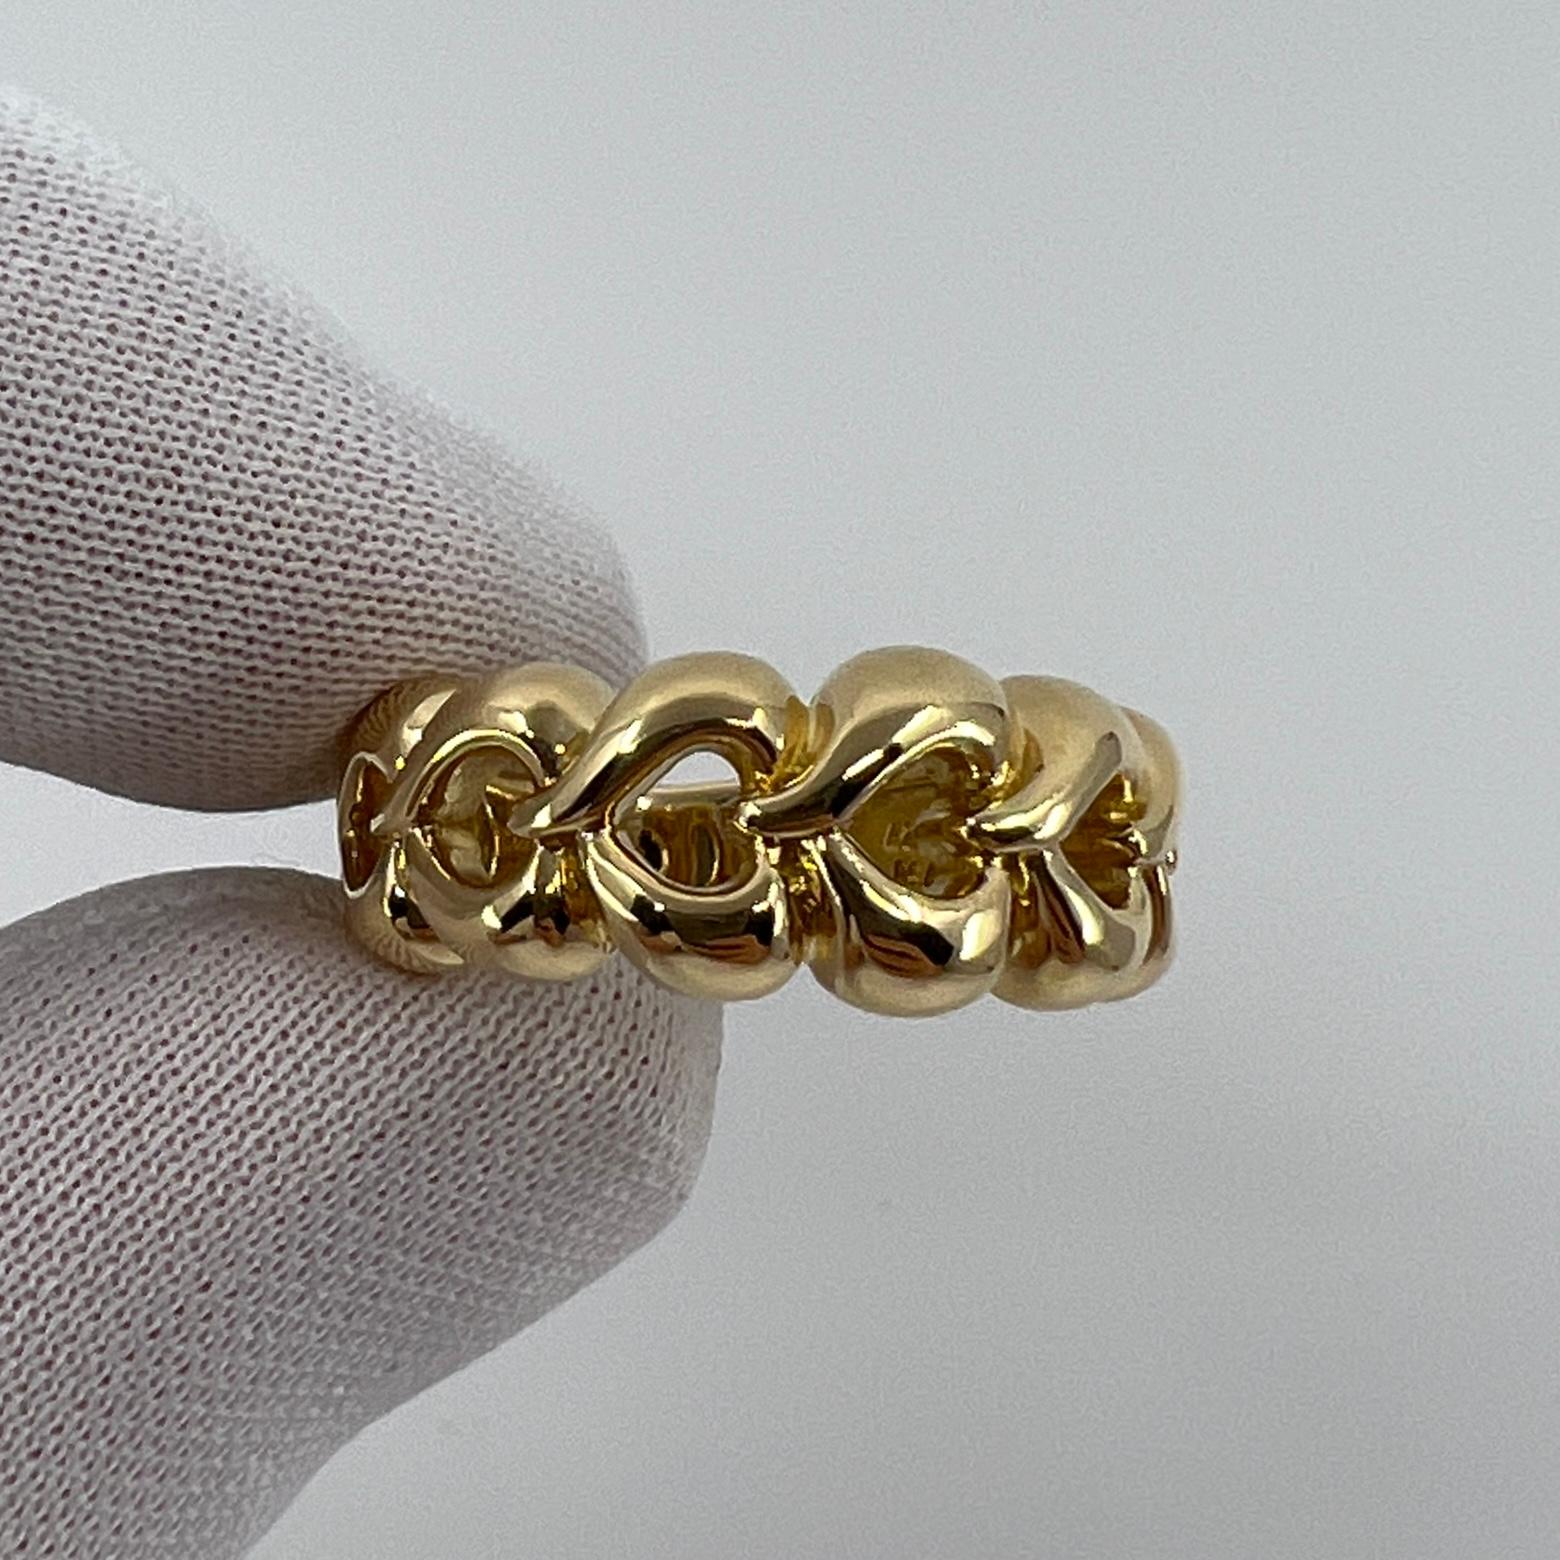 Rare Vintage Van Cleef & Arpels 18k Yellow Gold Open Heart Band Ring with Box 4